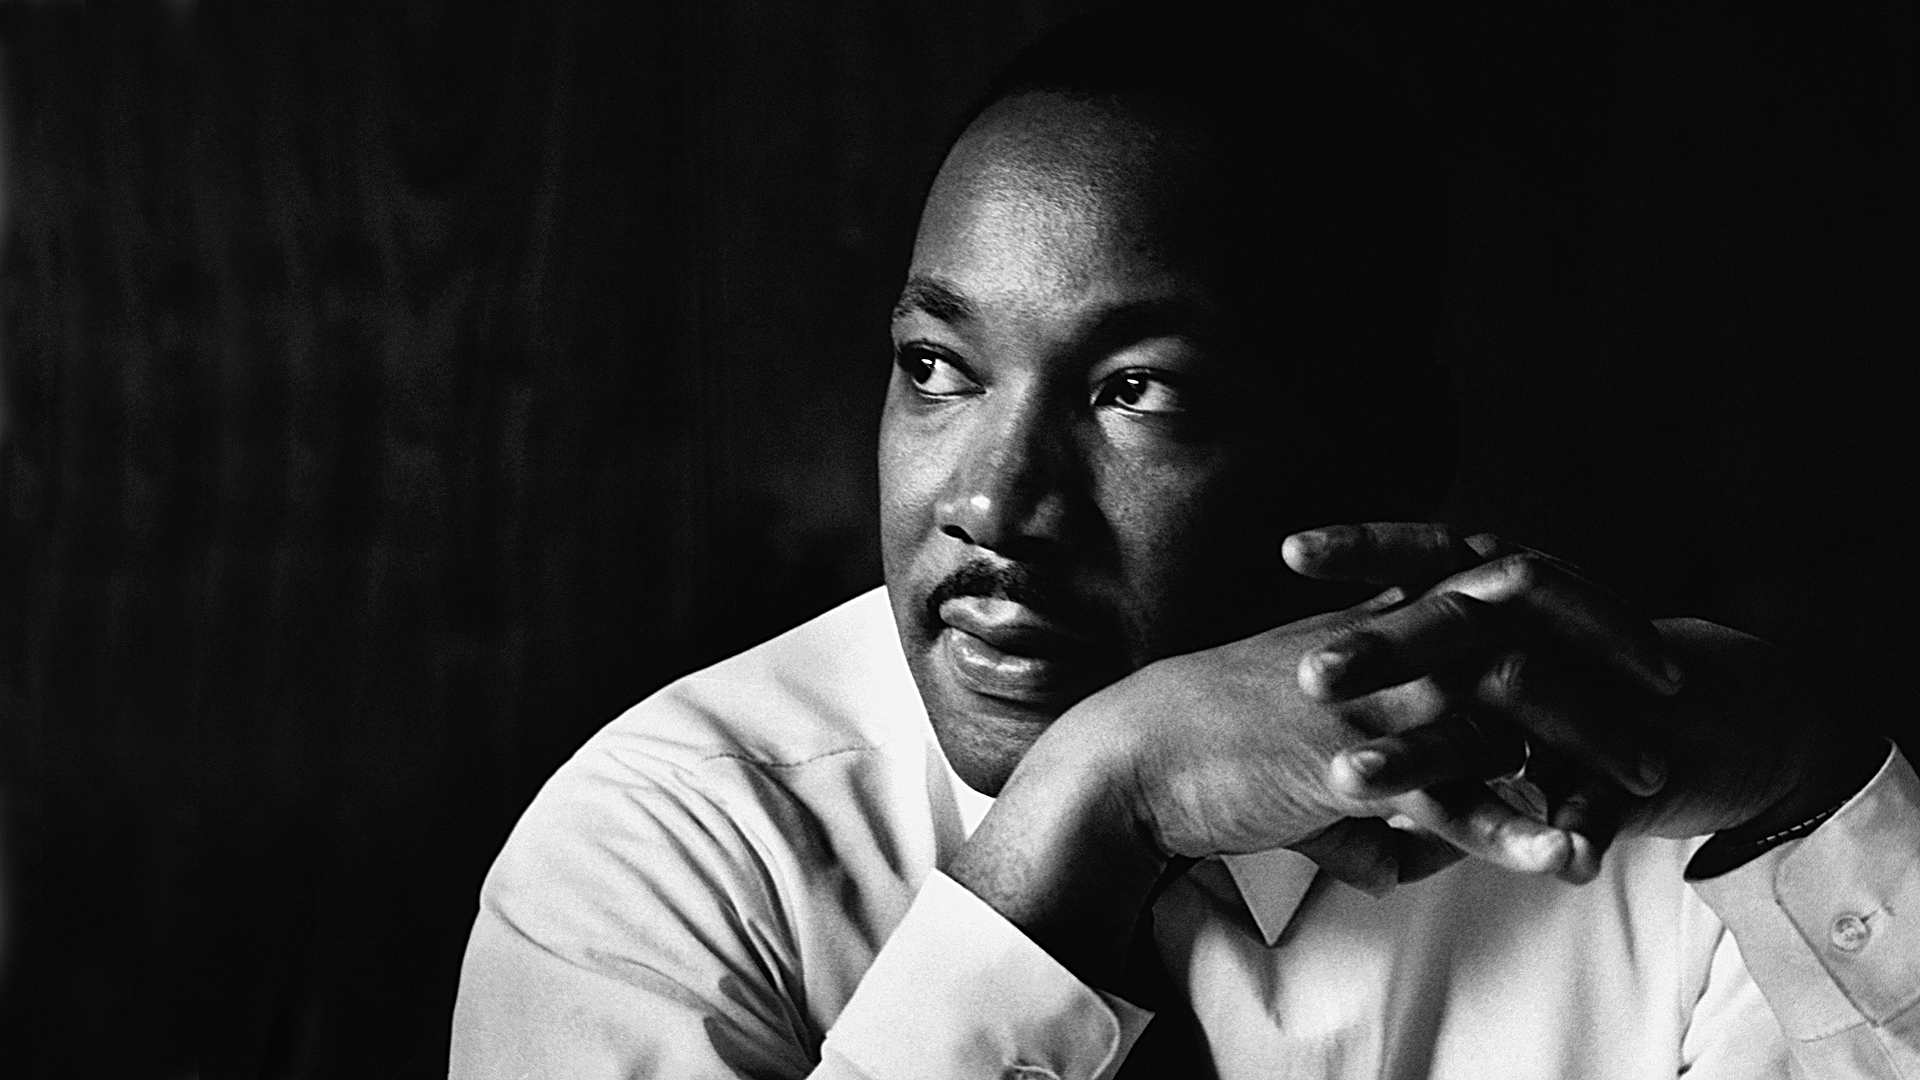 Image of Dr. Martin Luther King JR.